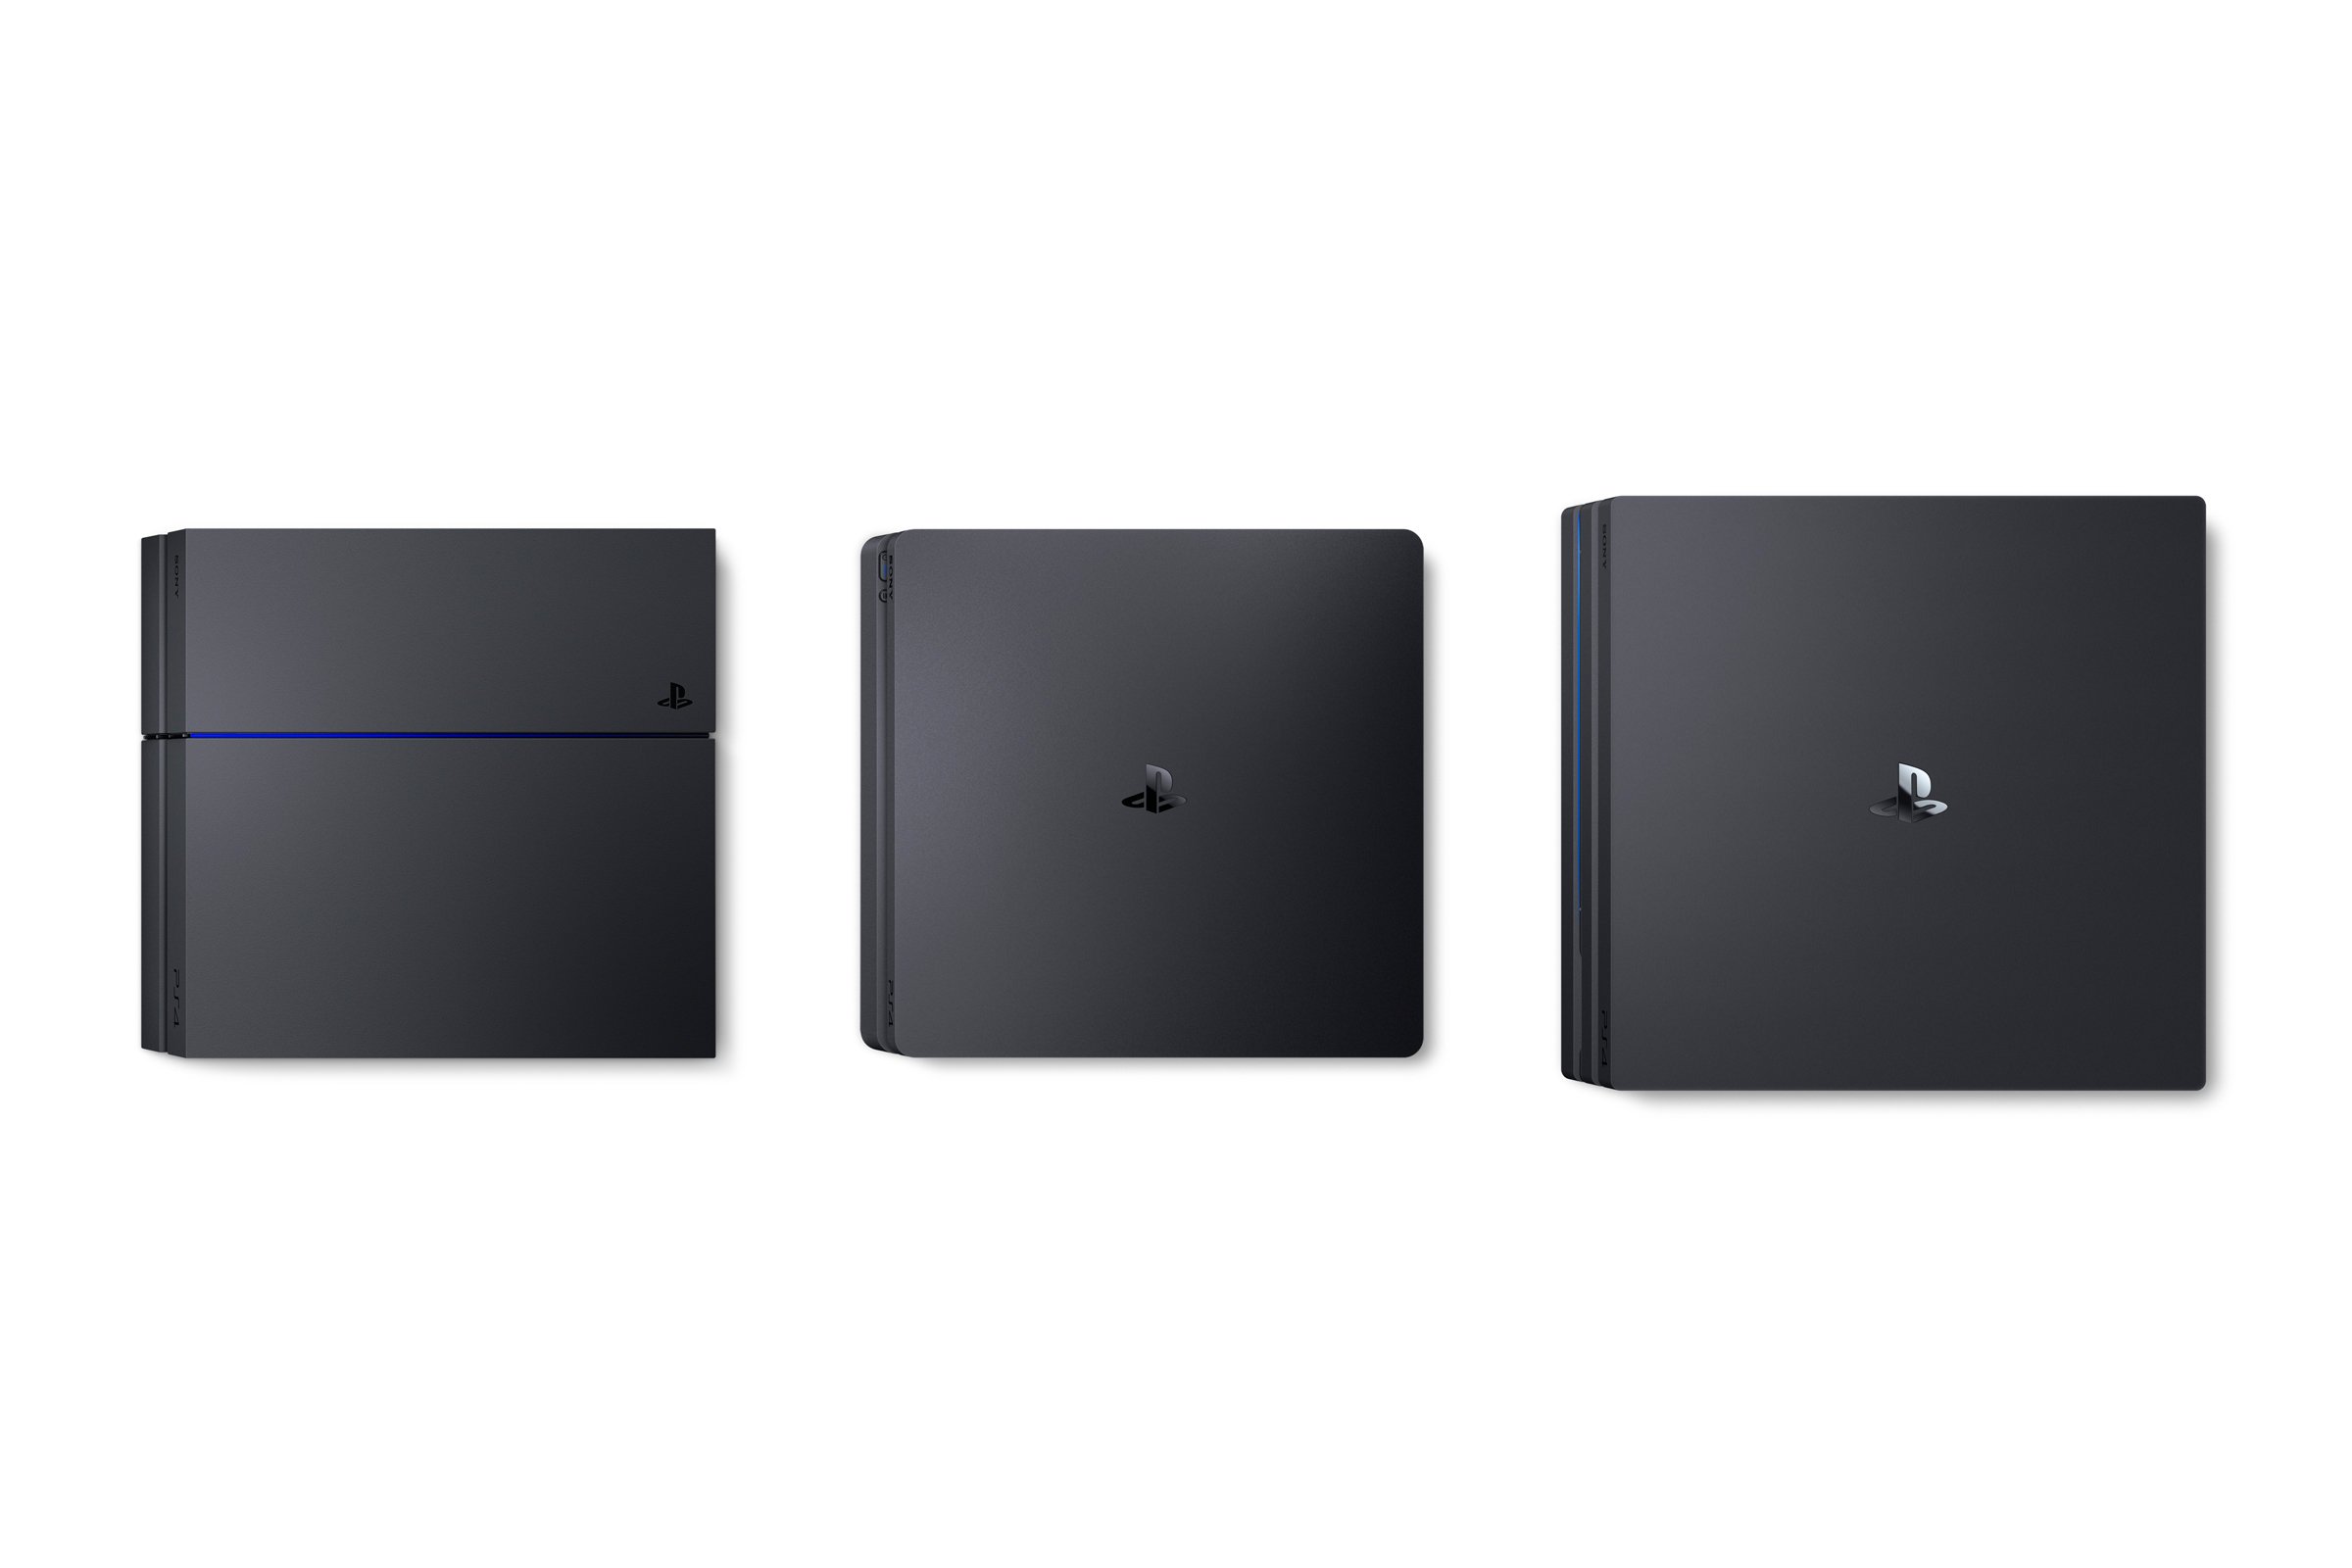 ps4 pro vs ps4 slim which is better